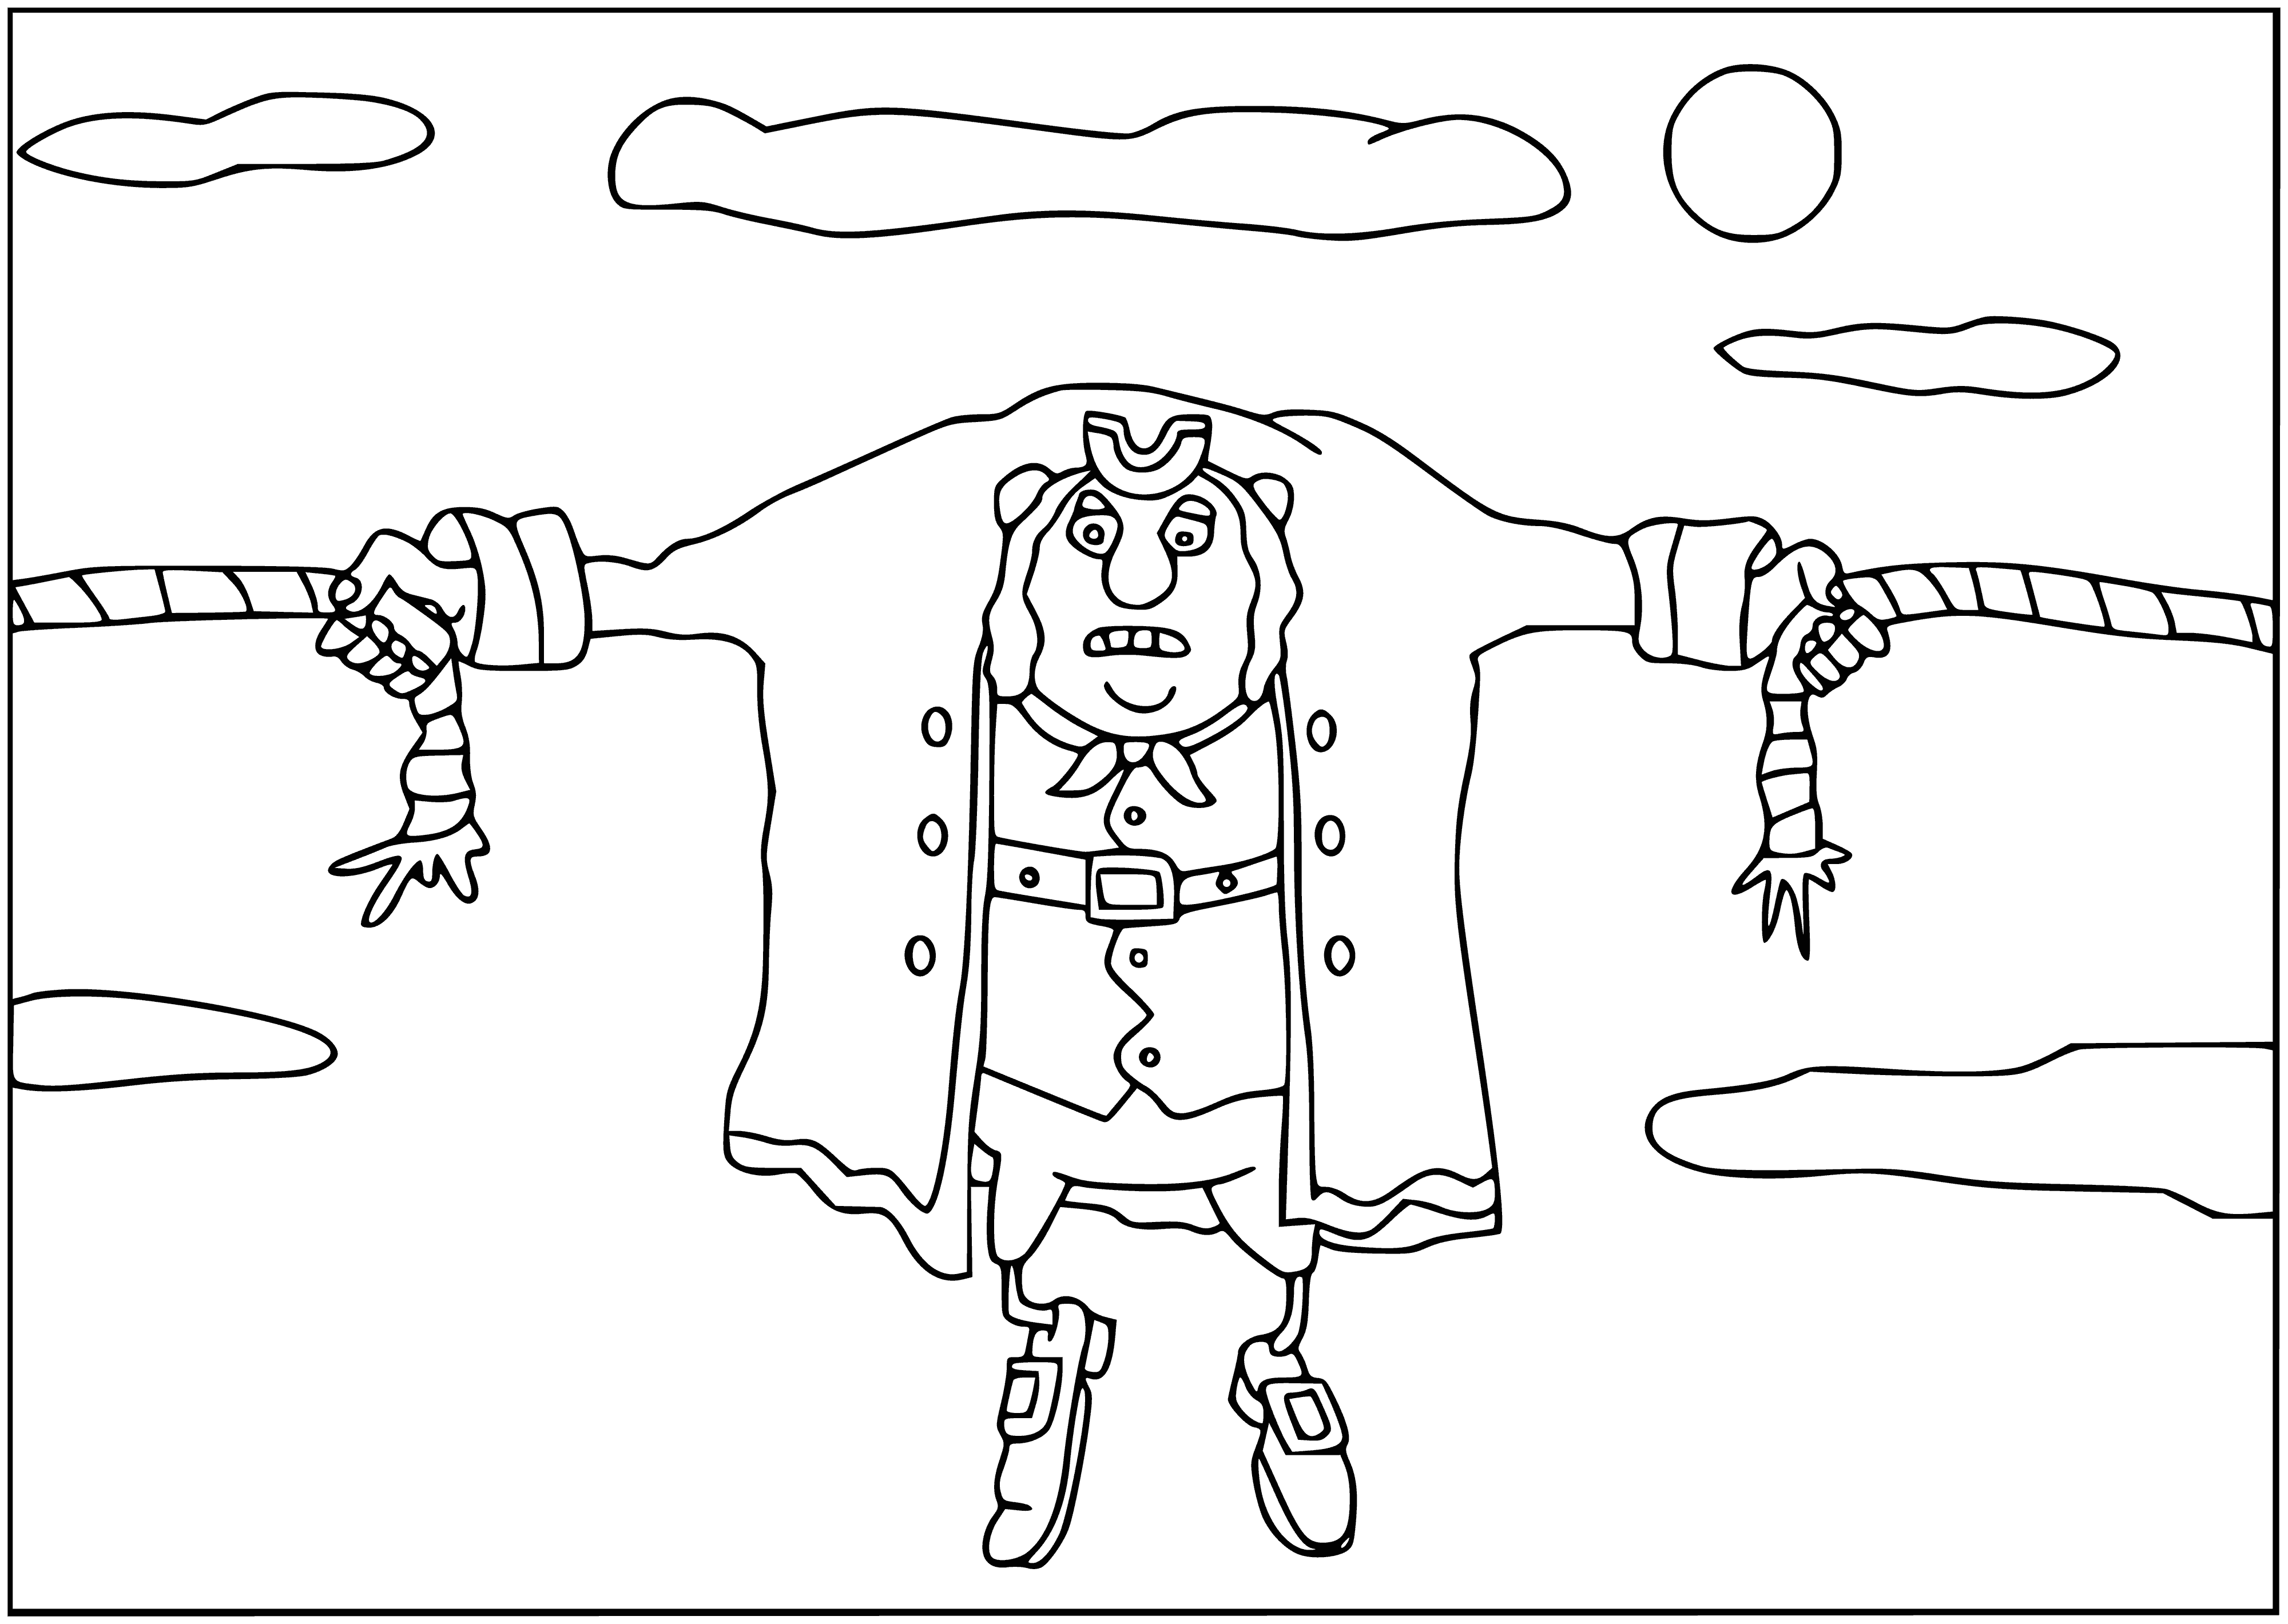 coloring page: A pirate ship is on a treasure island full of gold & jewels with birds flying overhead - no people in sight!